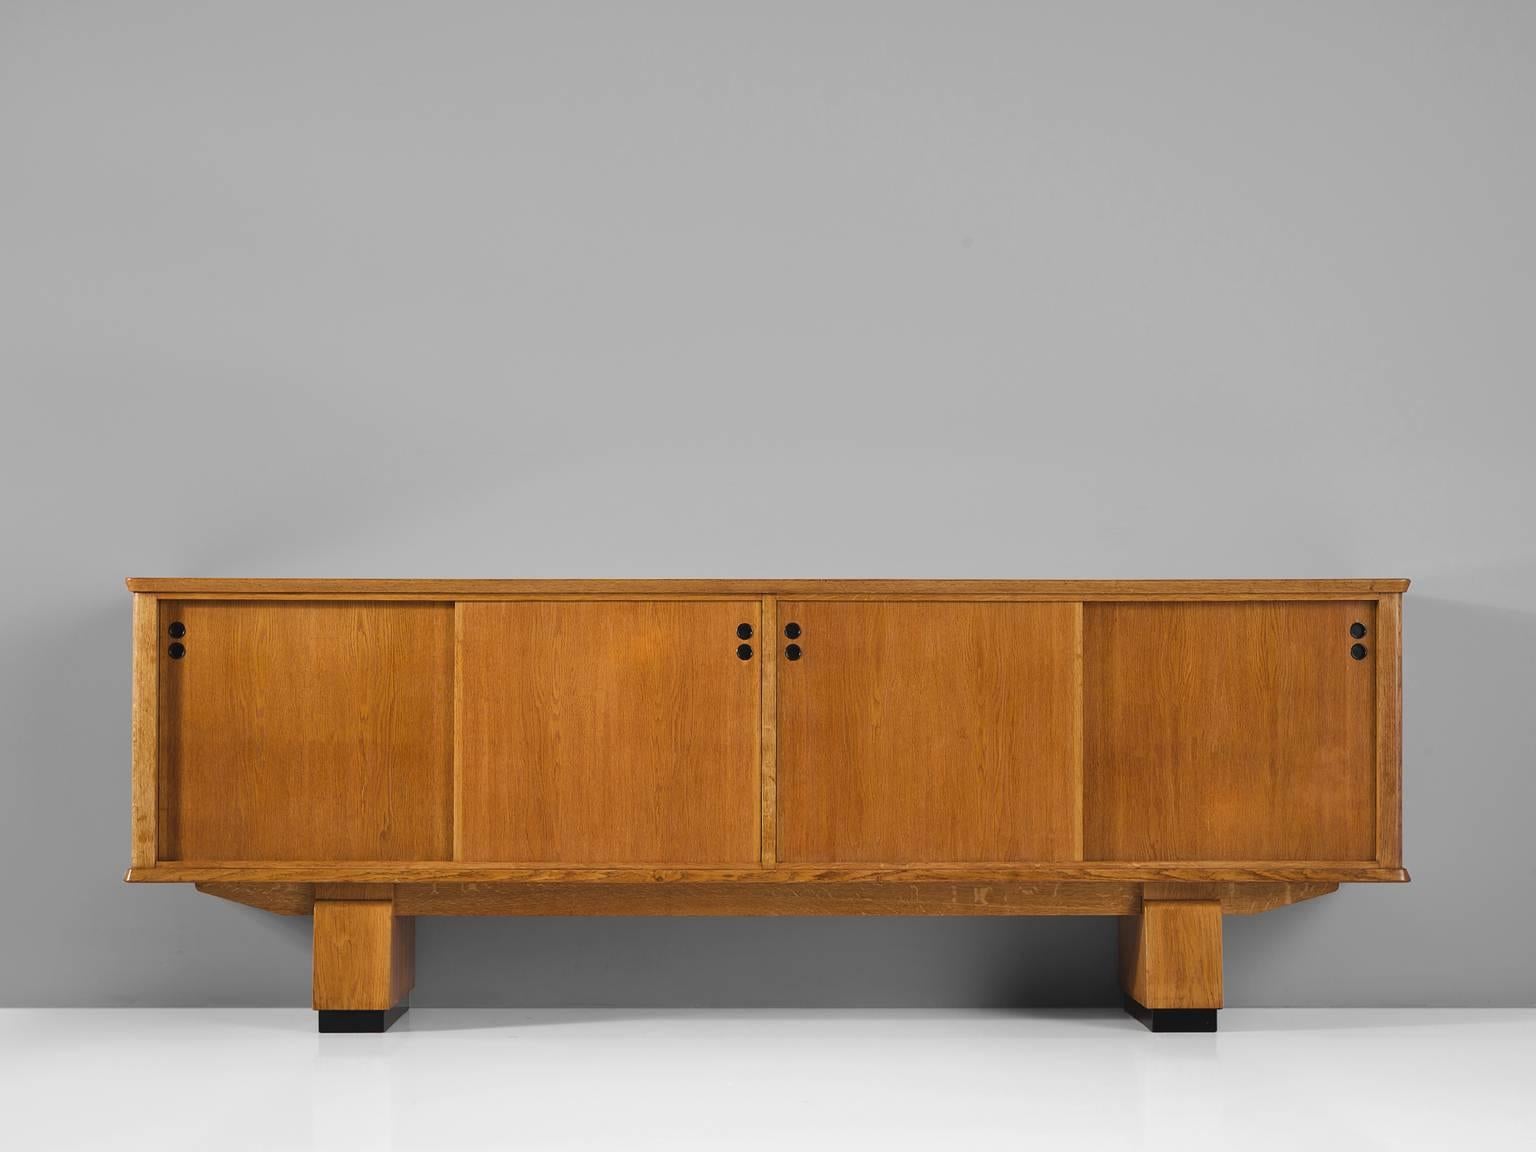 Rene Gabriel, sideboard in oak and polyester, France, 1930s. 

This French Art Deco style cabinet is executed in oak and the detailing is executed in lucite which has been recently been renewed. This sturdy legged sideboard with features two thick